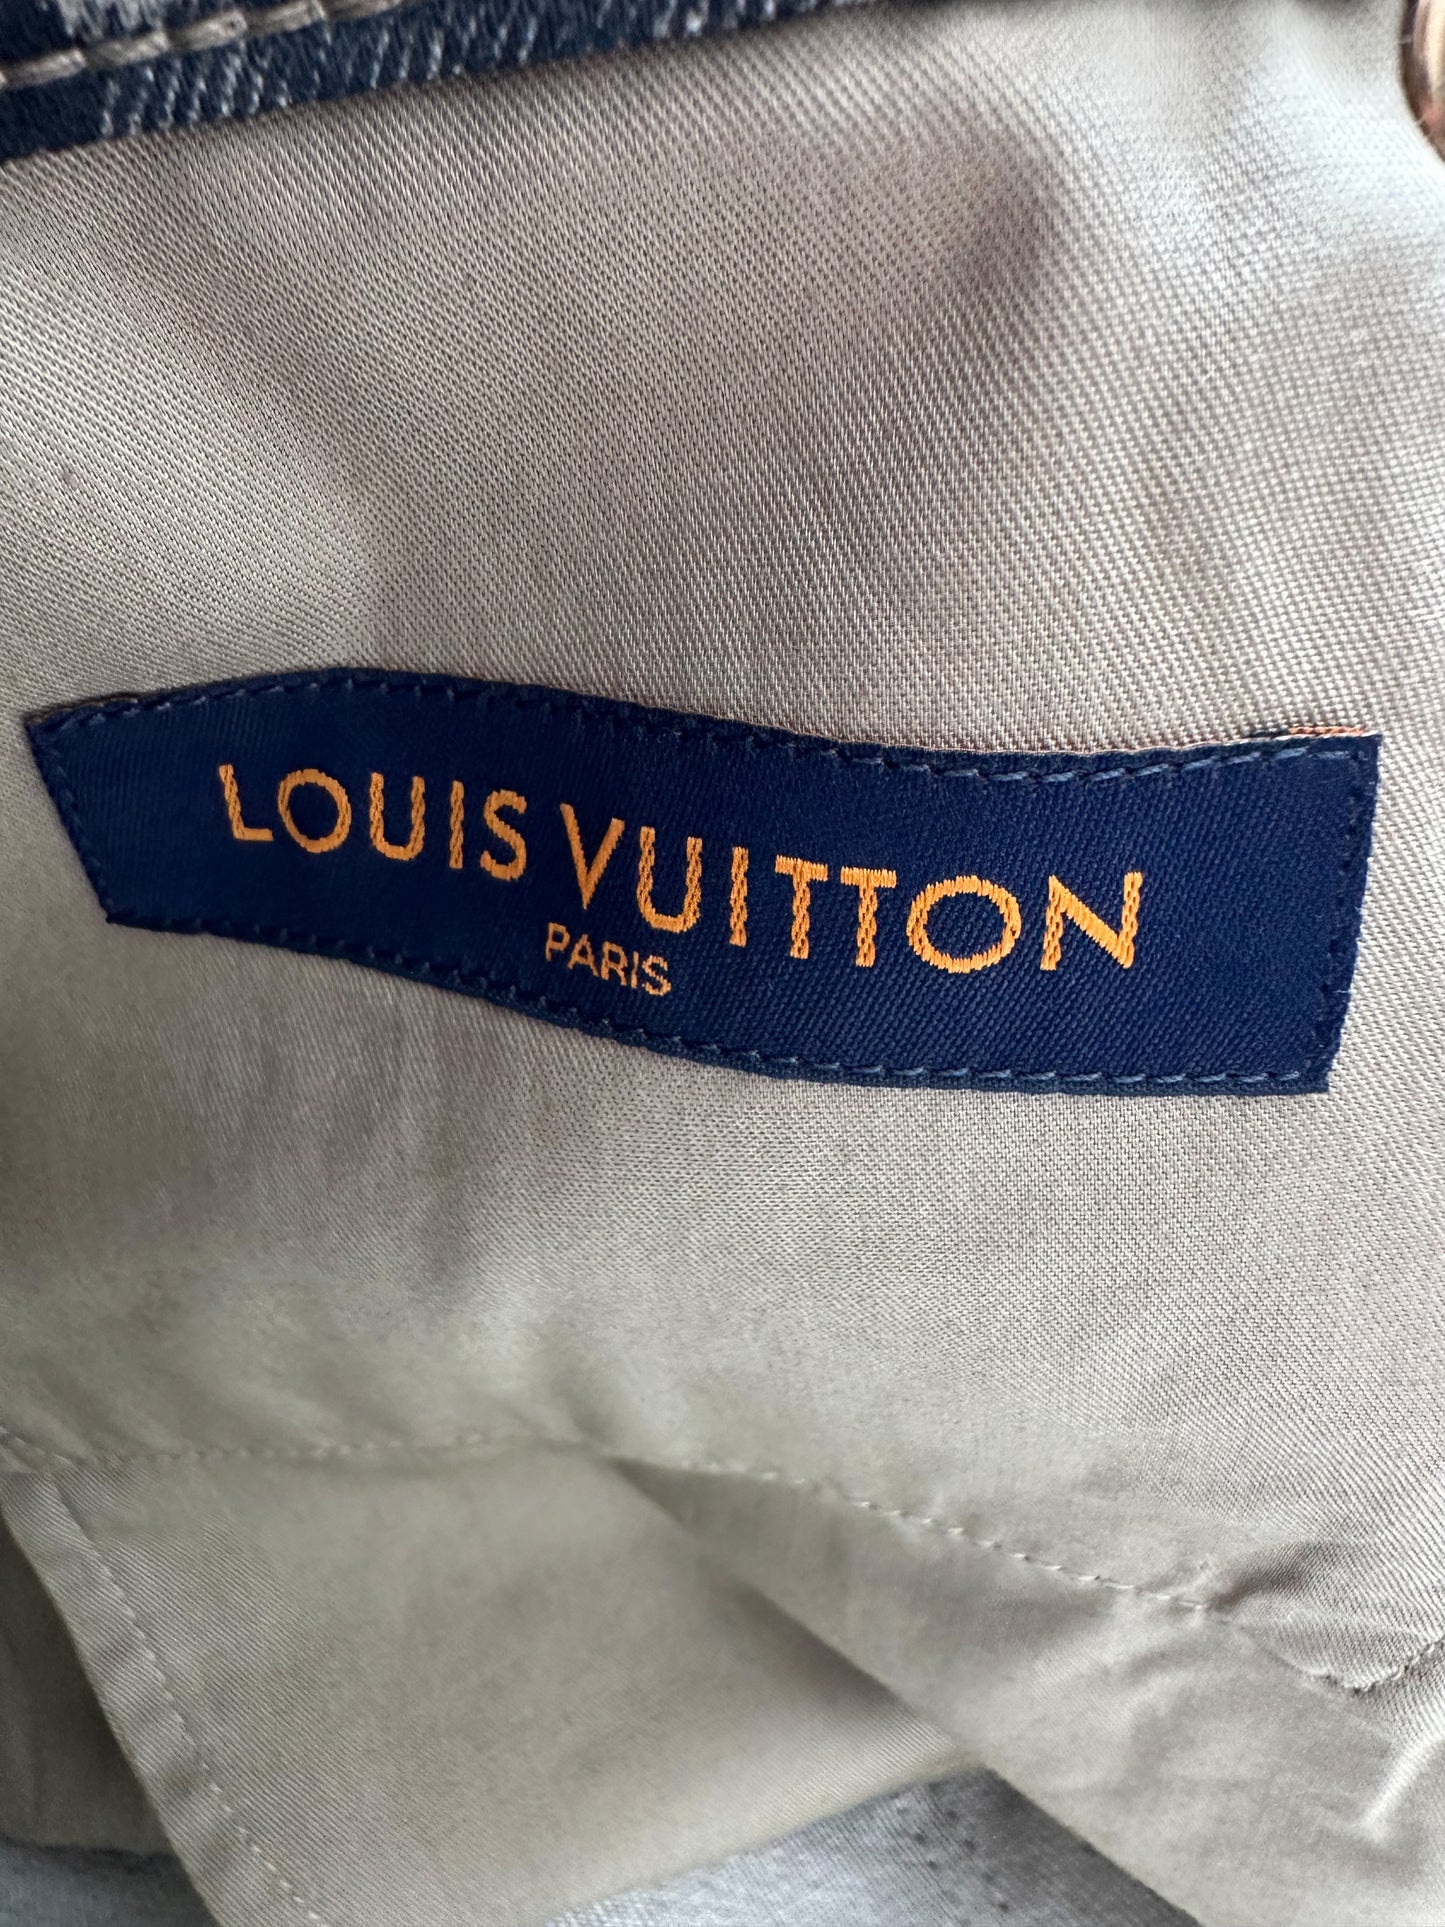 Shop Louis Vuitton Cargo Pants by えぷた